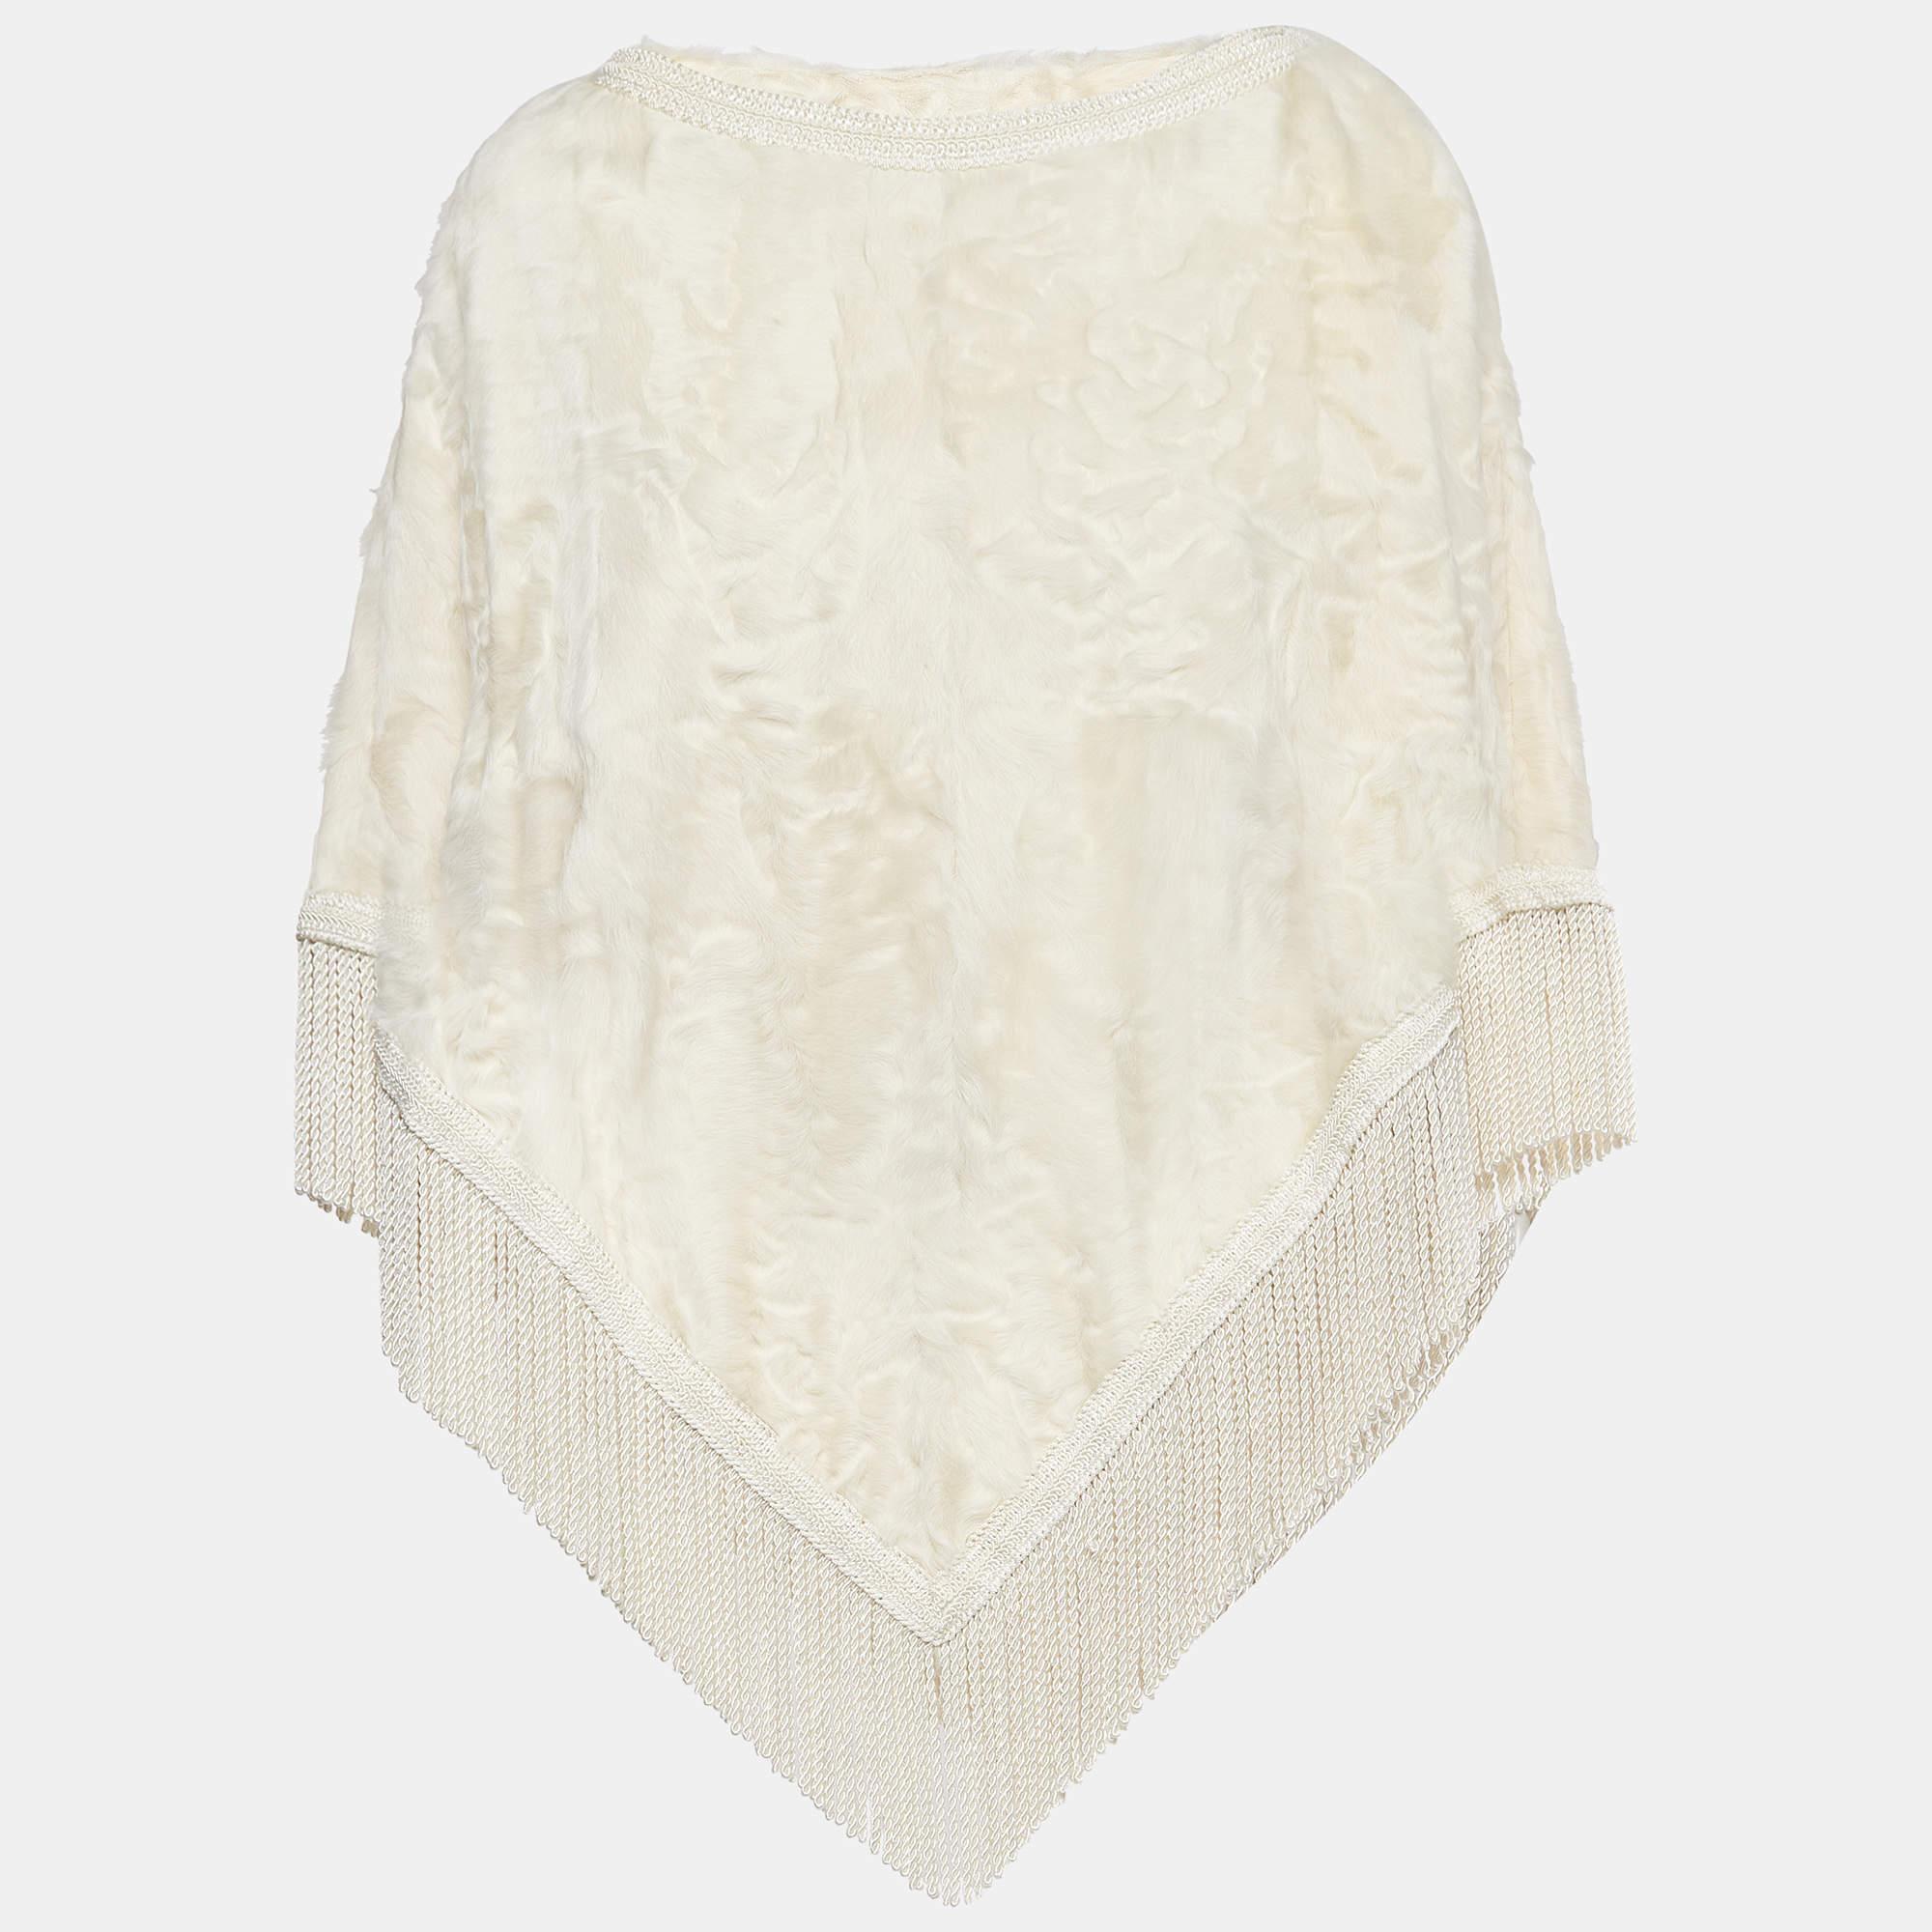 Embrace luxurious warmth with the Dolce & Gabbana poncho. Crafted with sumptuously soft shearling, its off-white hue exudes timeless elegance. Tassel detailing adds a playful touch, making it a chic yet cozy addition to any winter ensemble, perfect